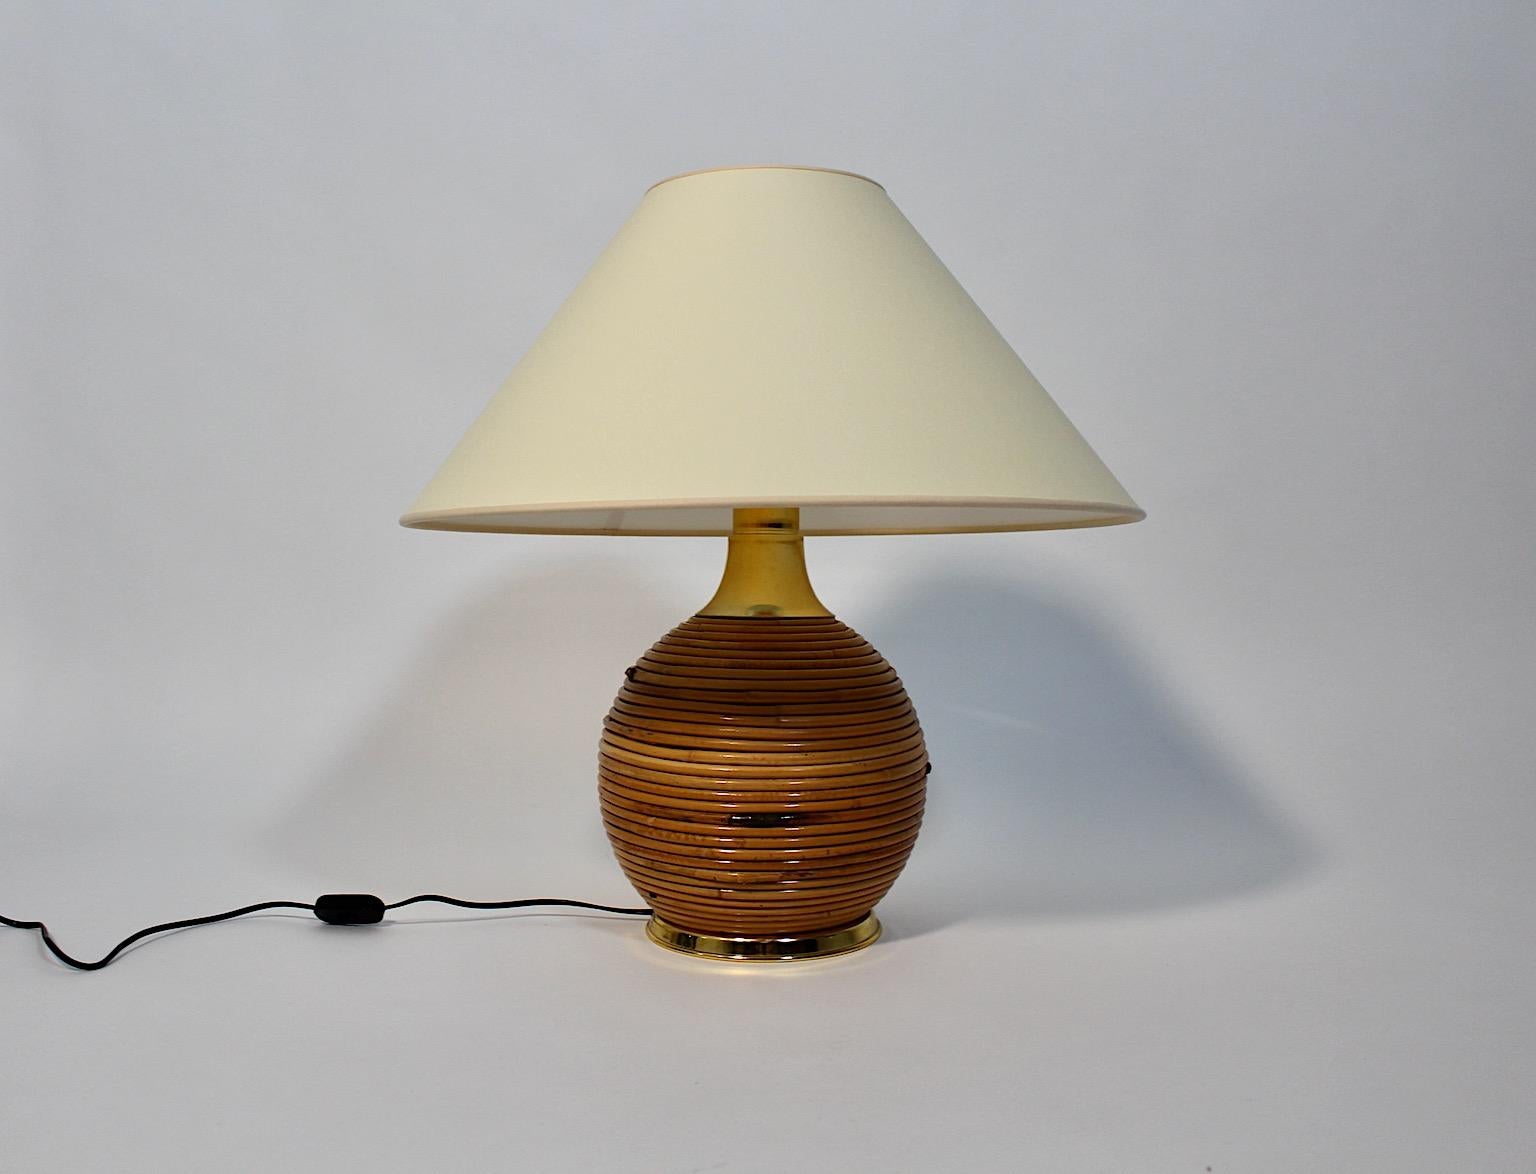 Organic modern vintage table lamp from rattan and golden metal 1970s Italy.
A stunning table lamp with a round base wrapped with rattan in warm brown color with a replaced hand made lamp shade in light color.
This vintage rattan table lamp floats